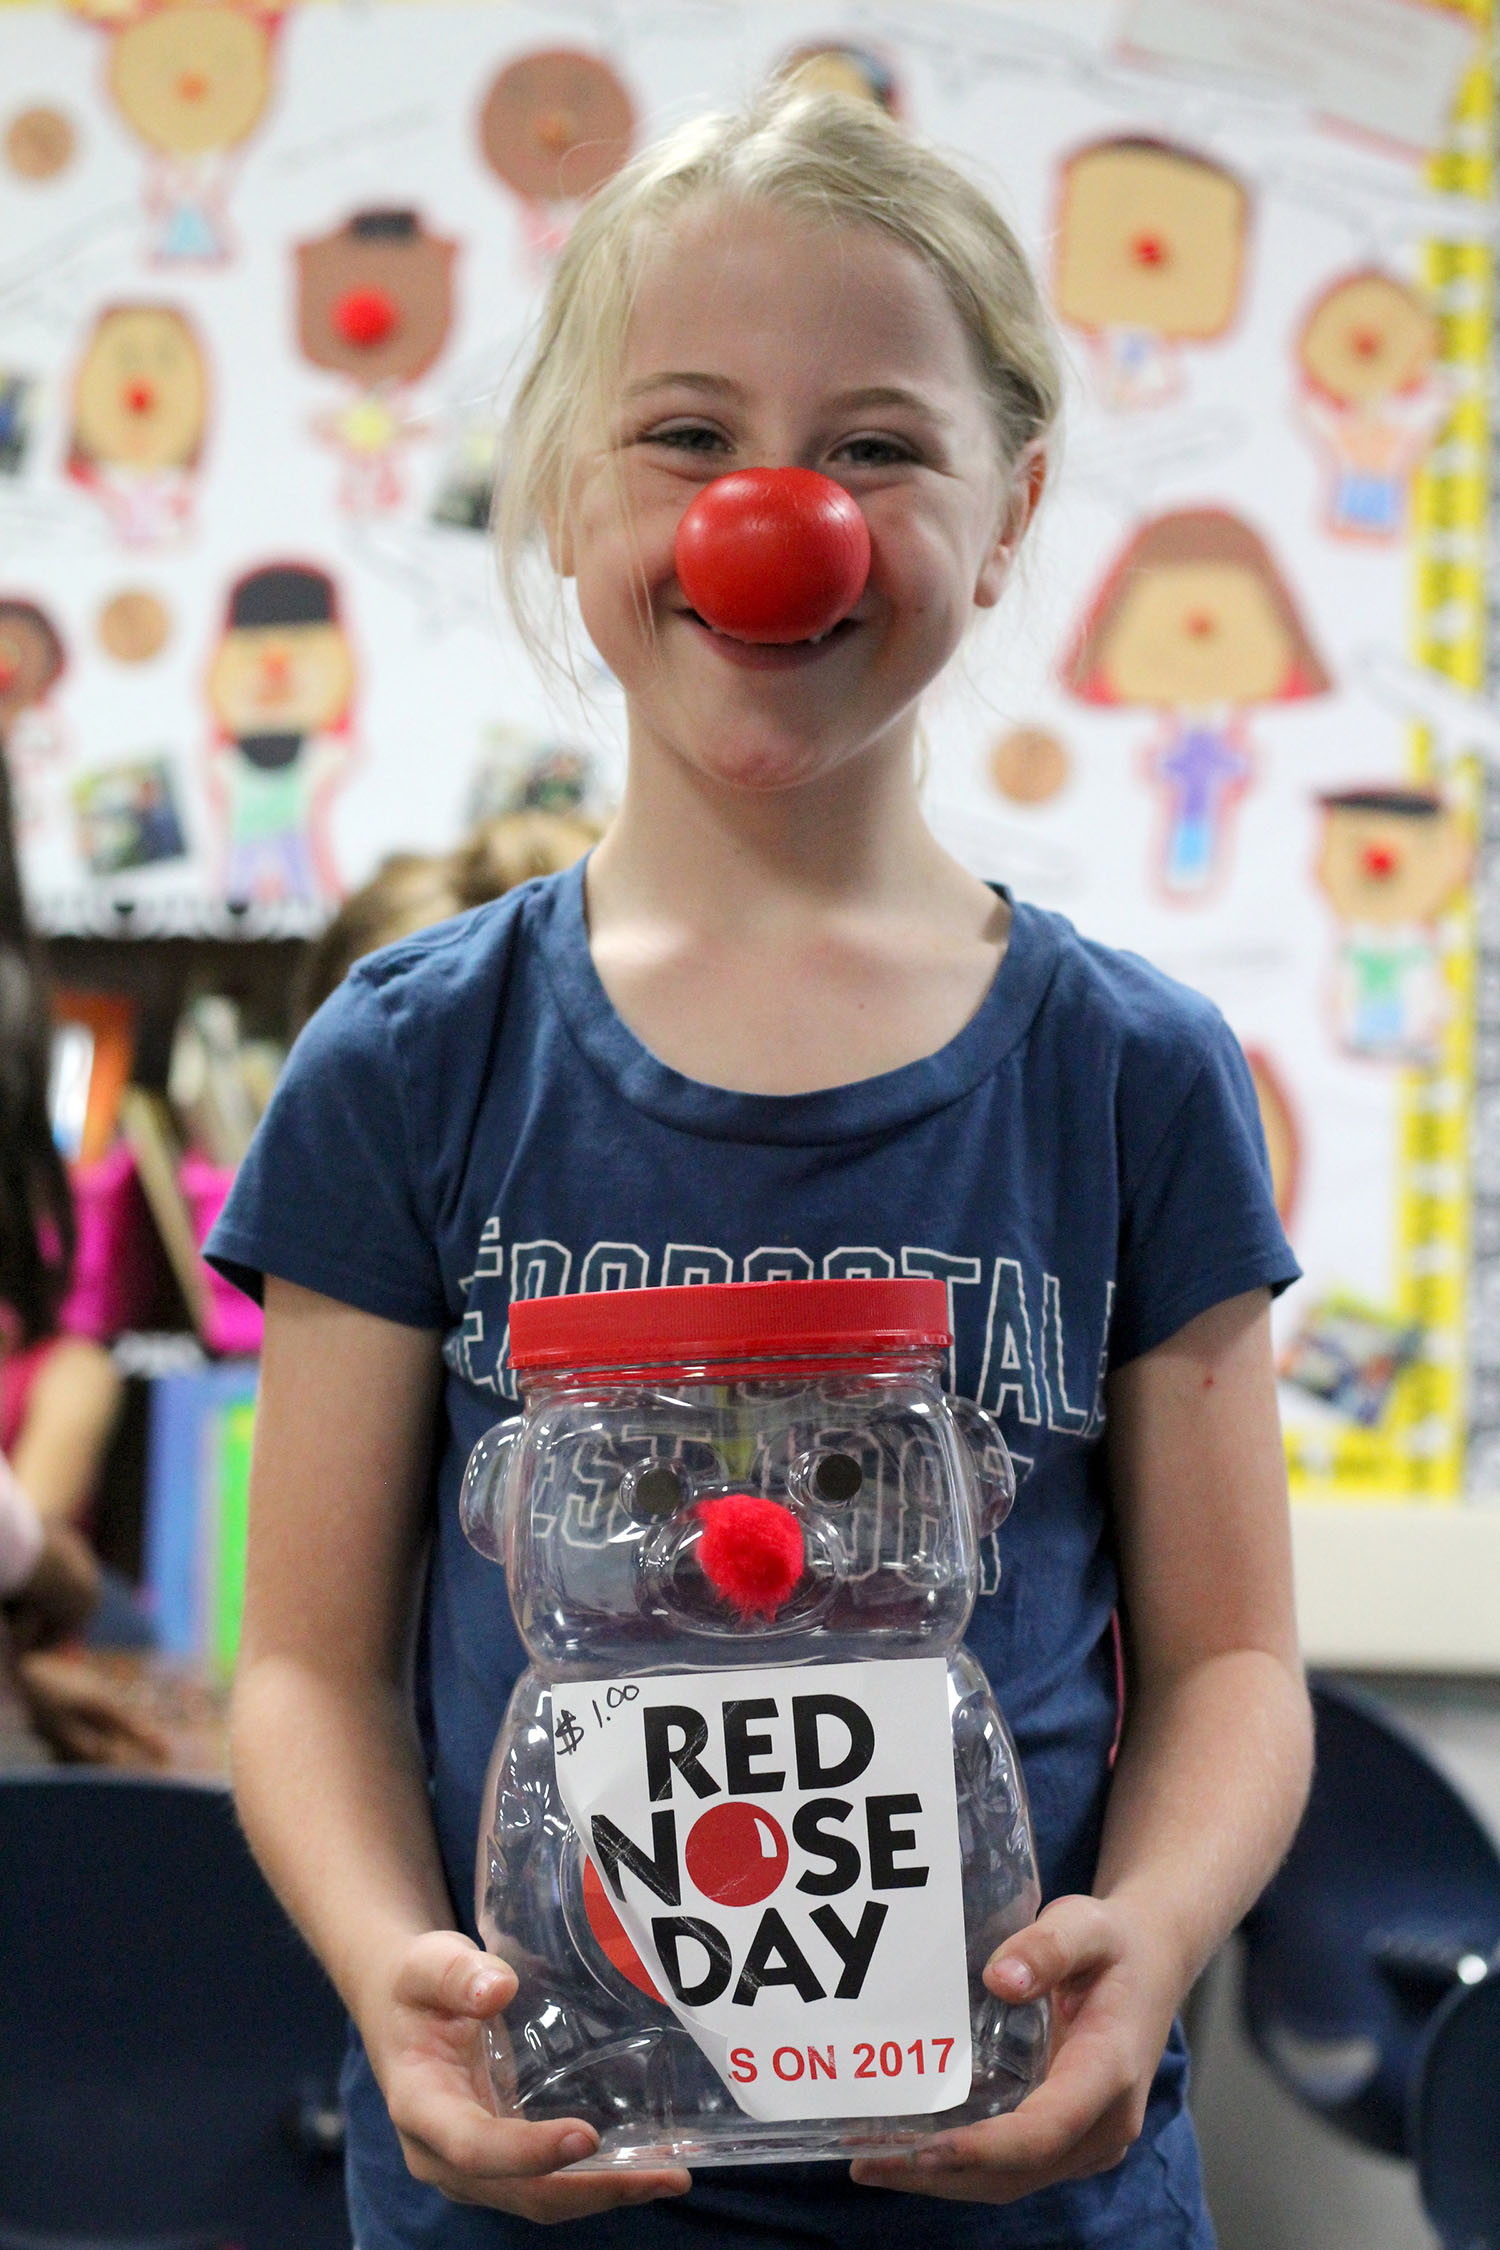 Hold a penny drive for Red Nose Day.